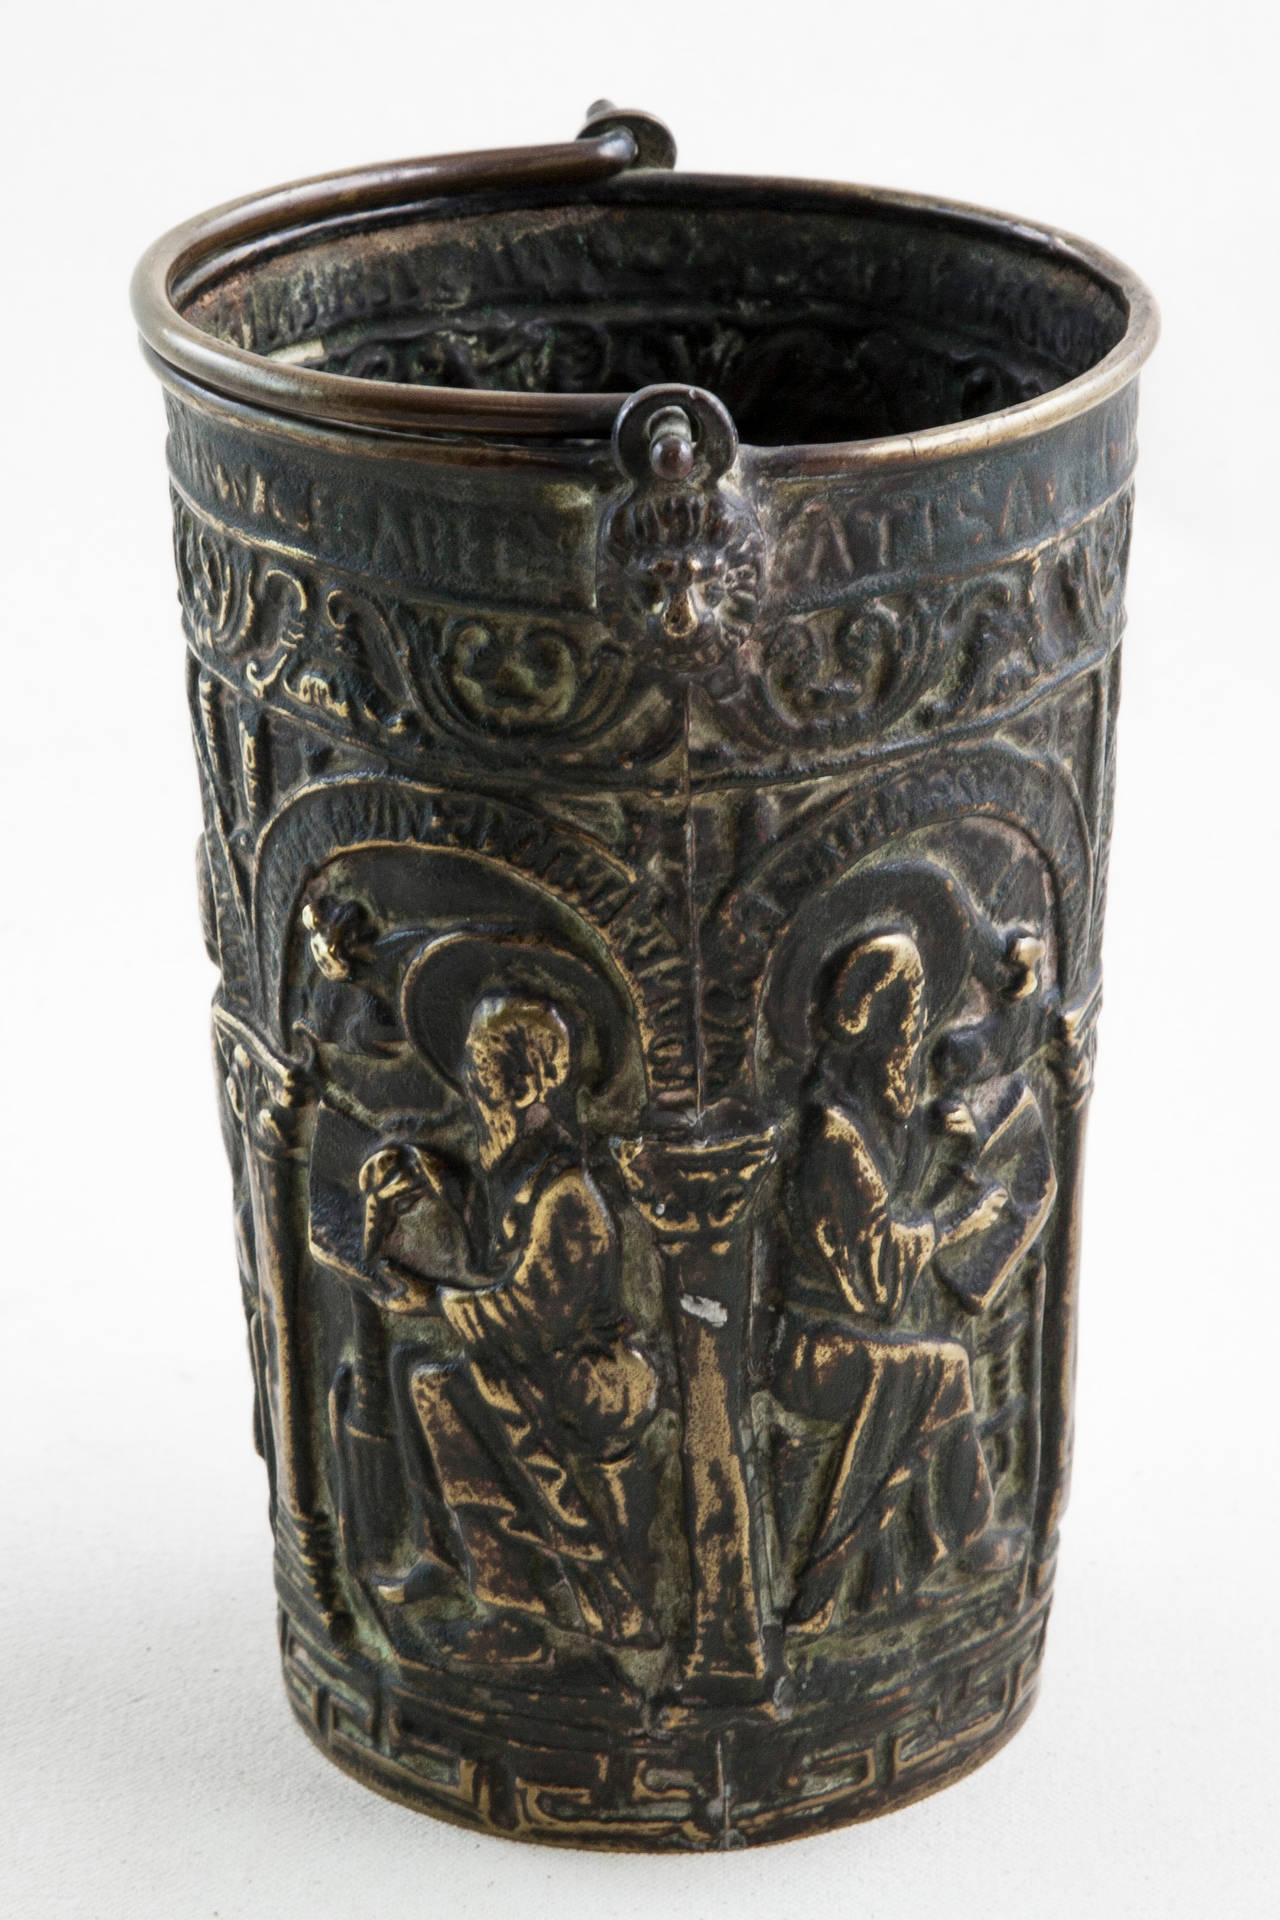 This 17th century Louis XIV period bronze holy water vessel features a Gothic scene featuring monks attending to their monastic duties. A unique historical artifact for collectors, this piece is made of solid bronze which has aged to a deep hue.